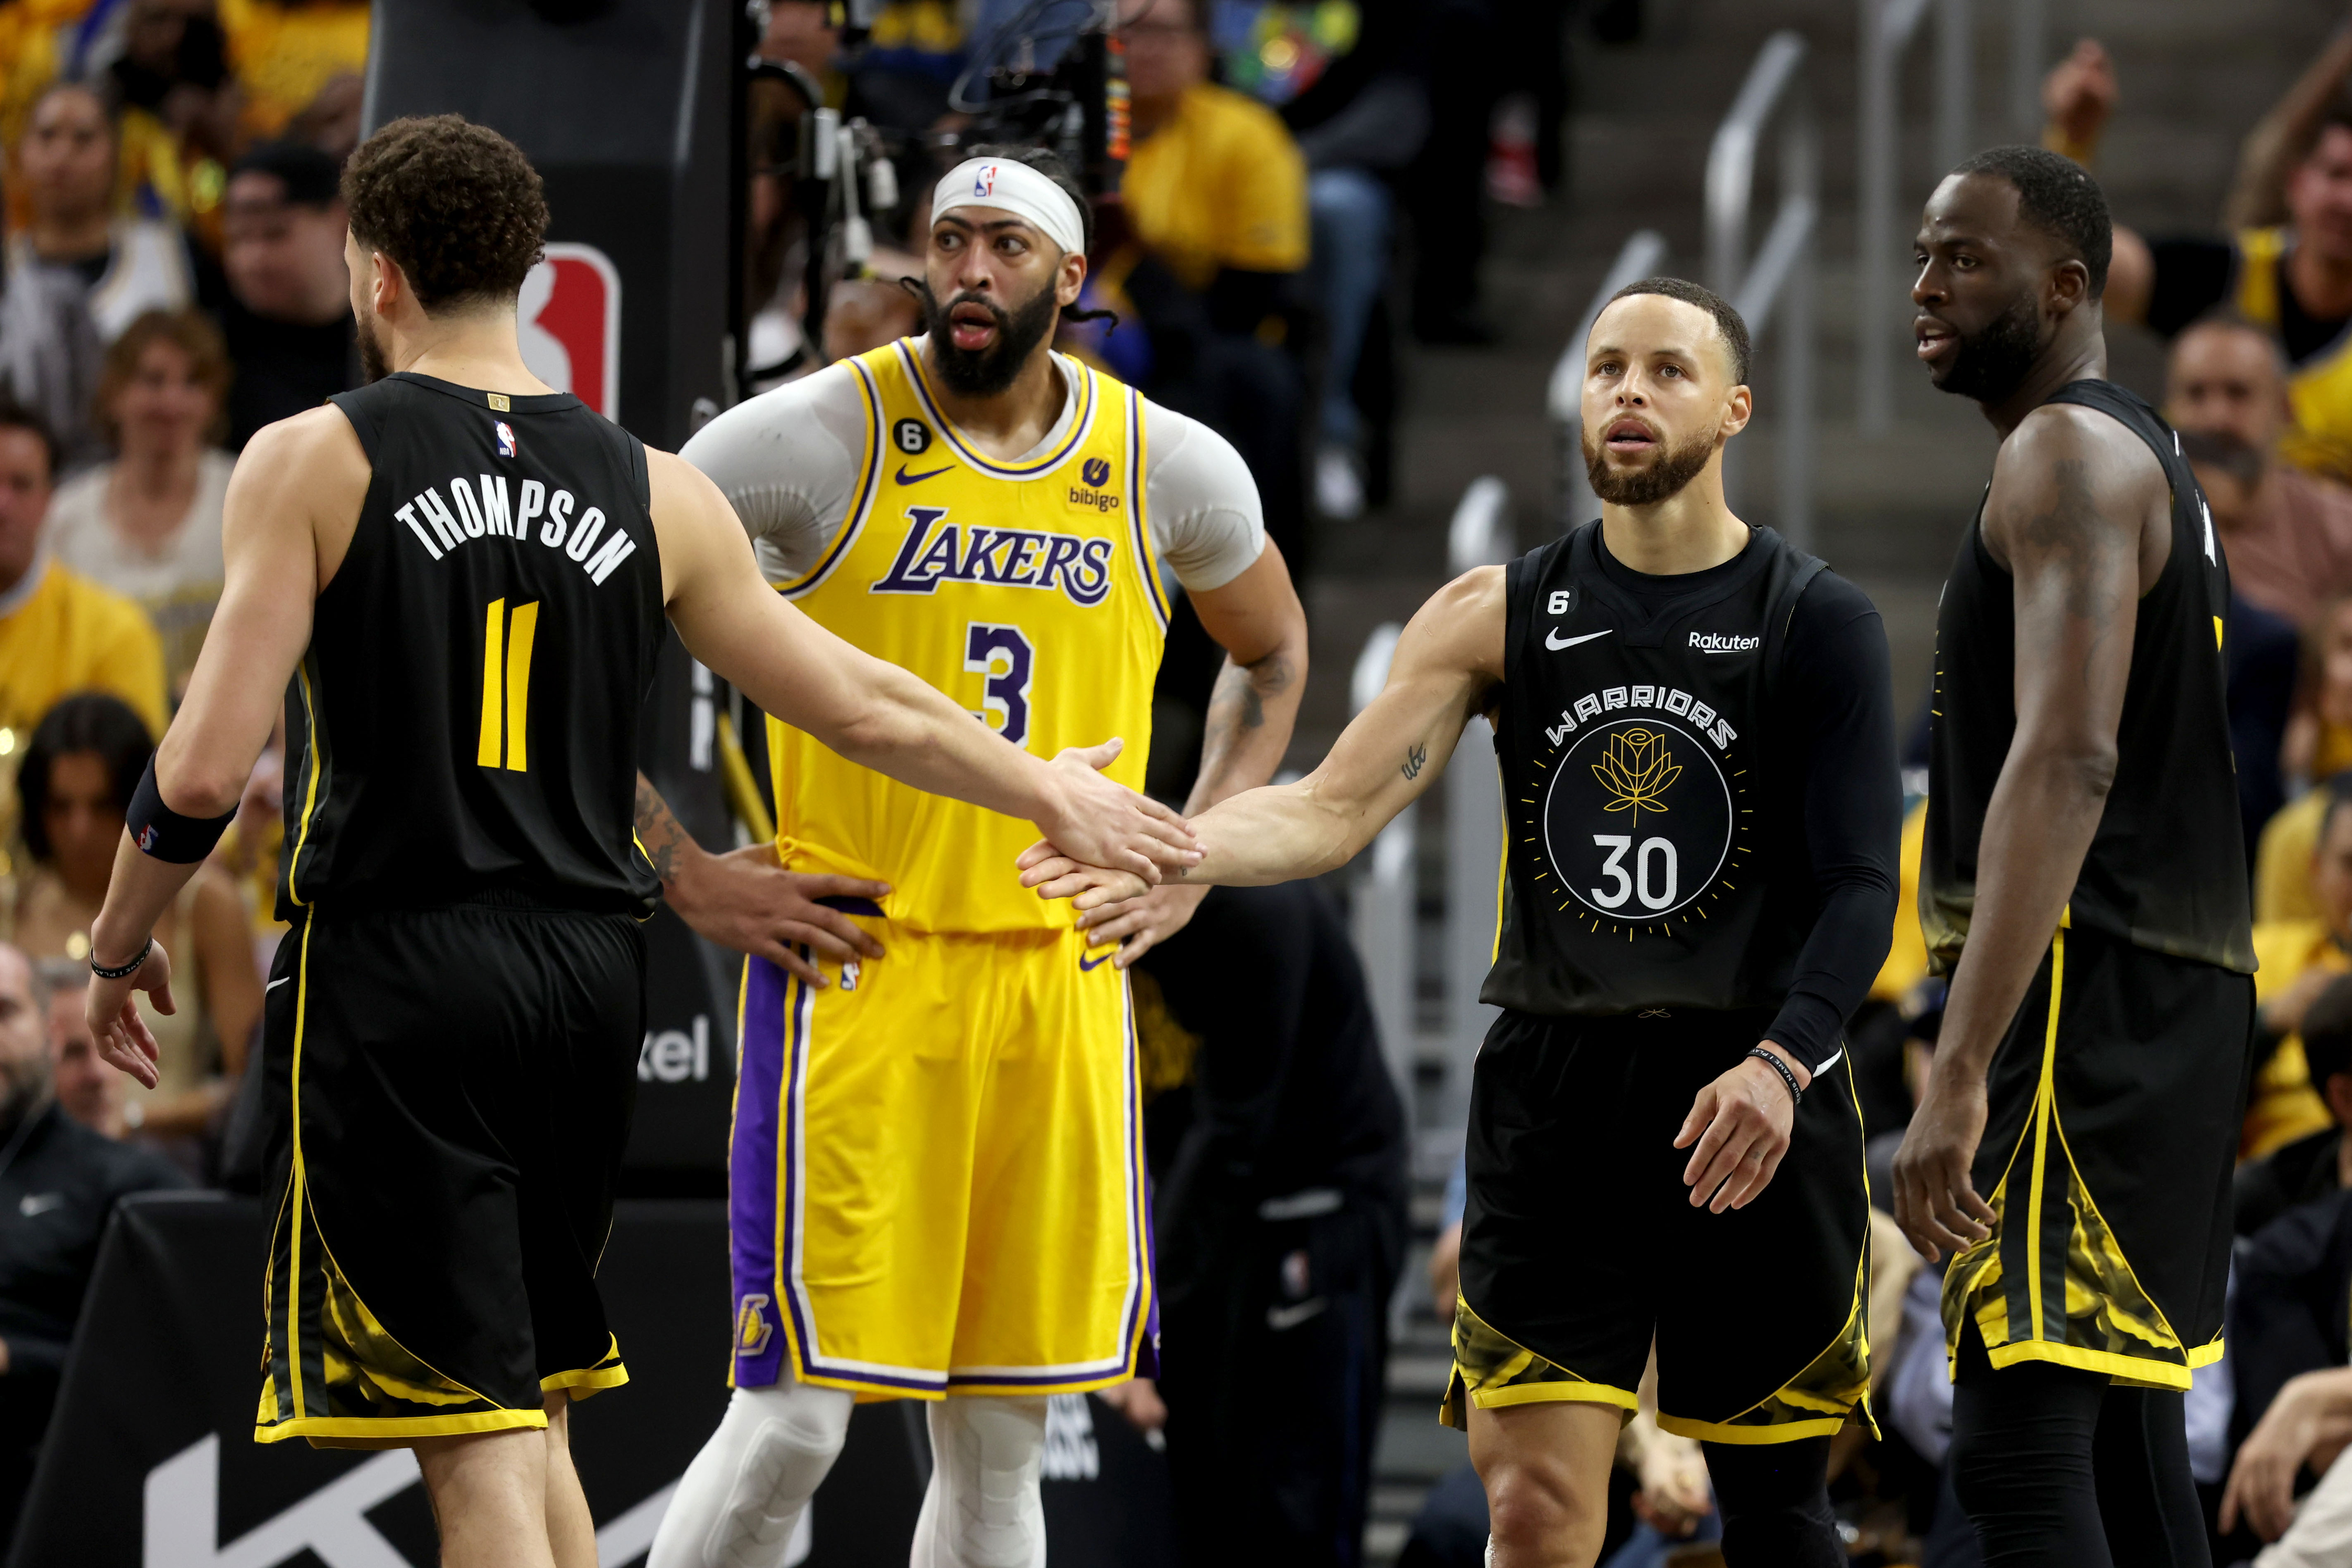 Los Angeles Lakers at Golden State Warriors in Game 1 of the NBA Western Conference semifinals